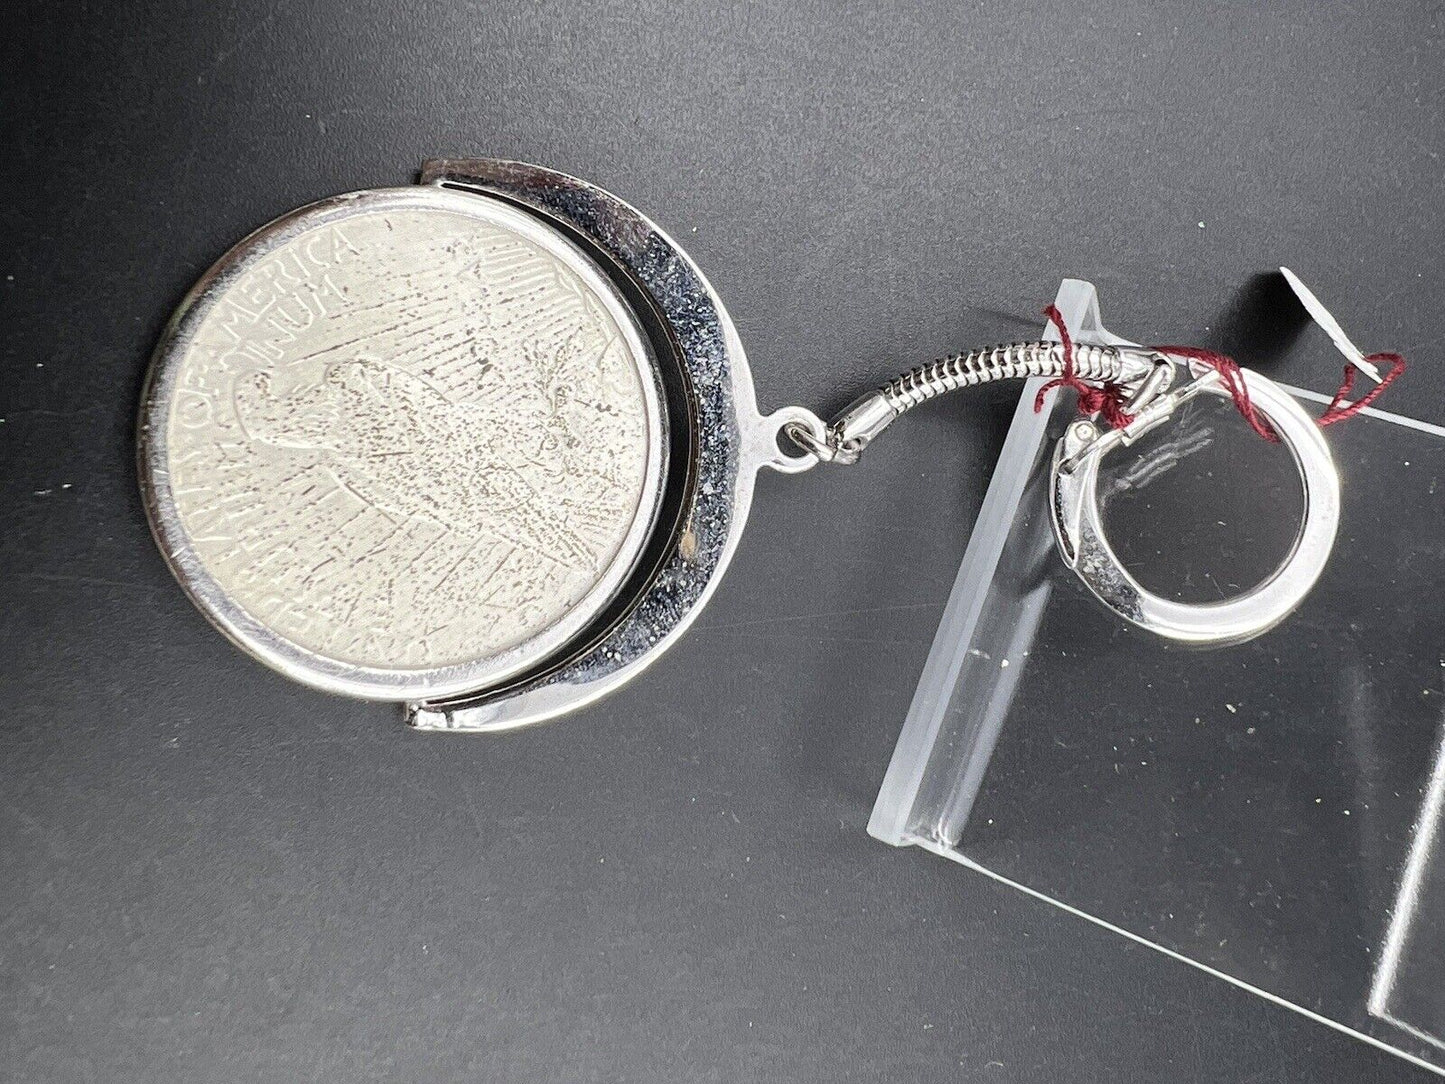 1923 $1 Peace US Silver Dollar Coin Plated and in Keychain